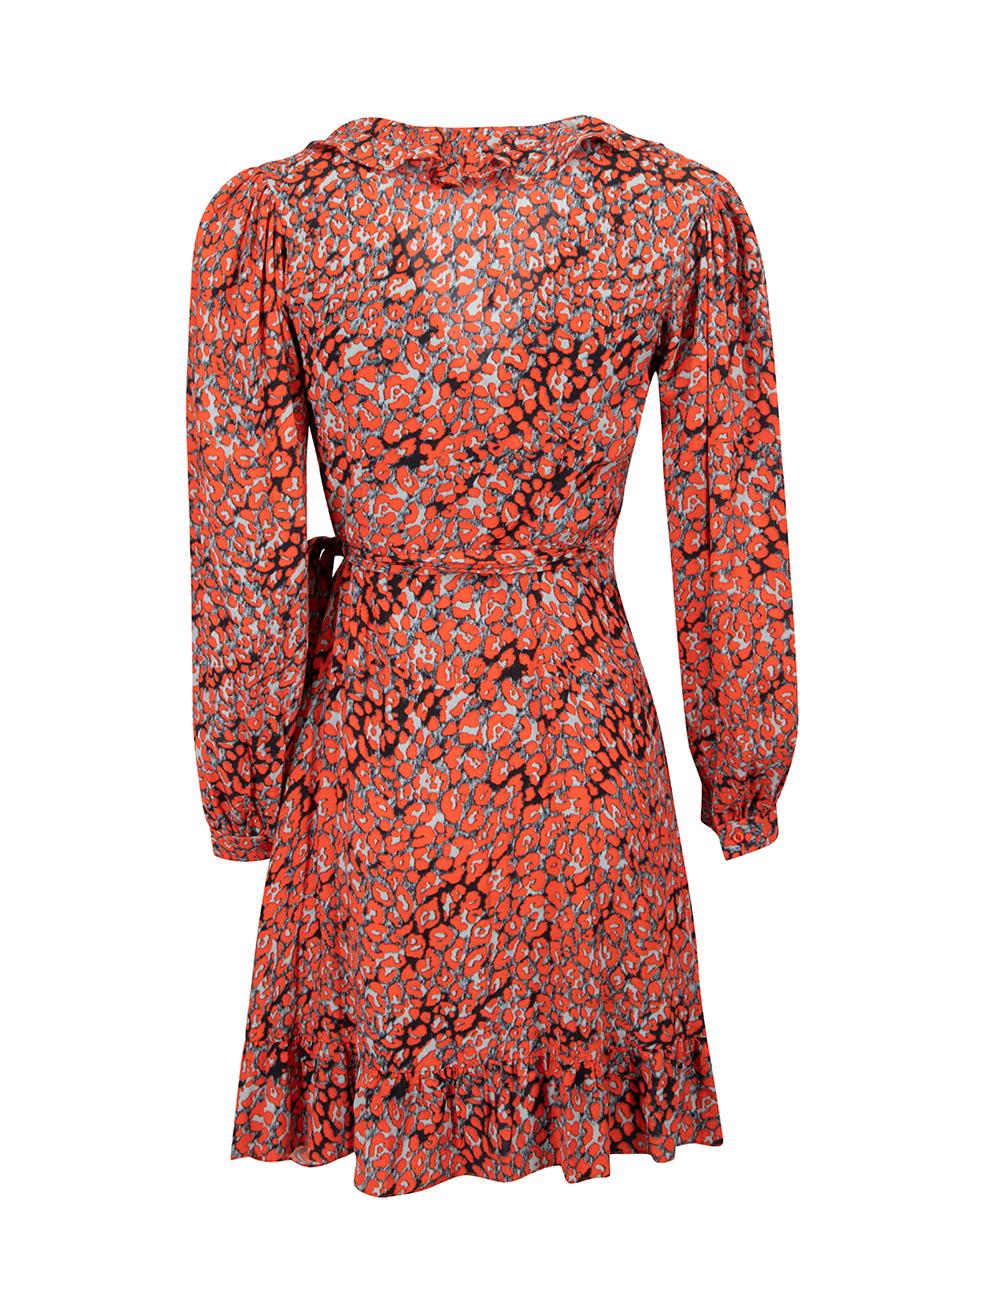 Maje Red Leopard Print Mini Wrap Dress Size S In New Condition For Sale In London, GB